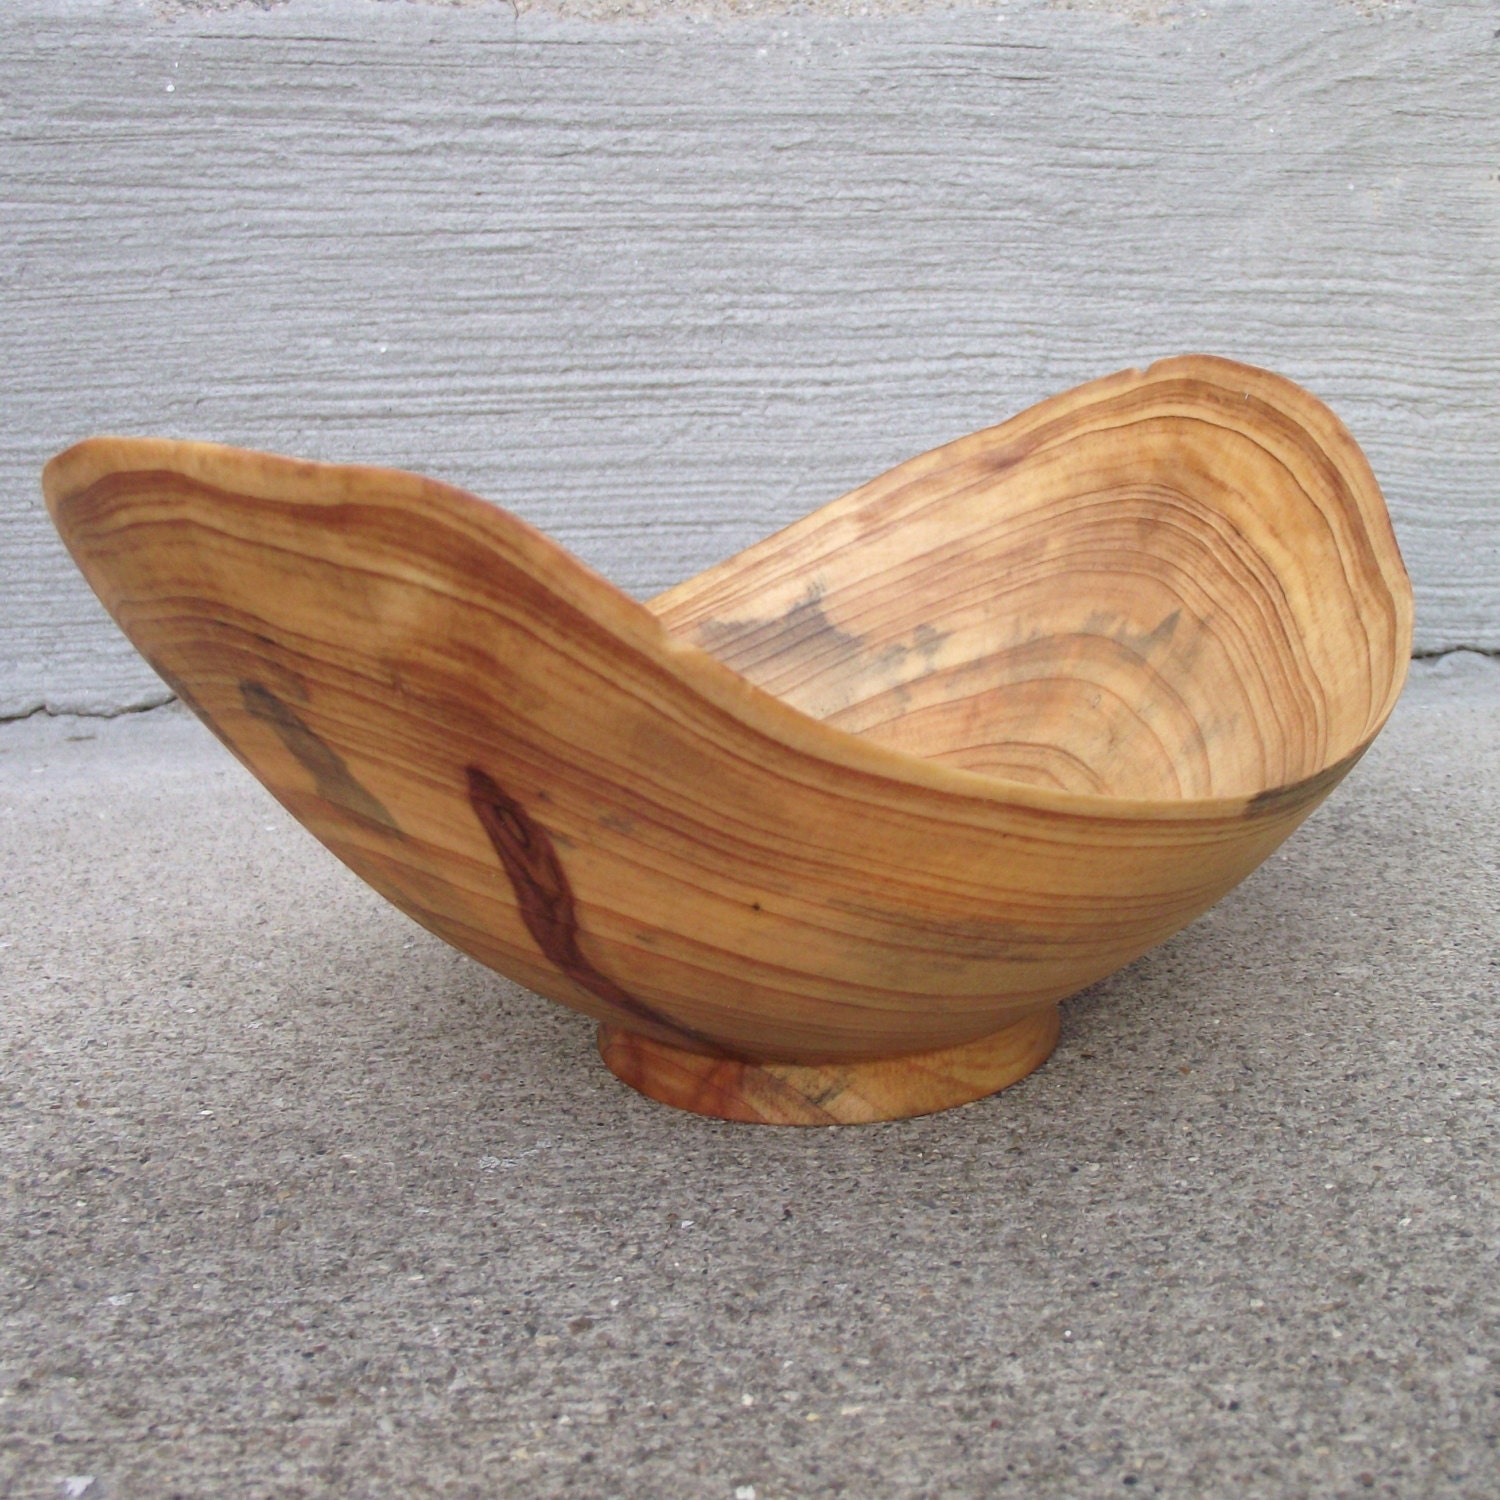 Cypress Wood Turned Bowl with Natural Edge by sunsetturnings